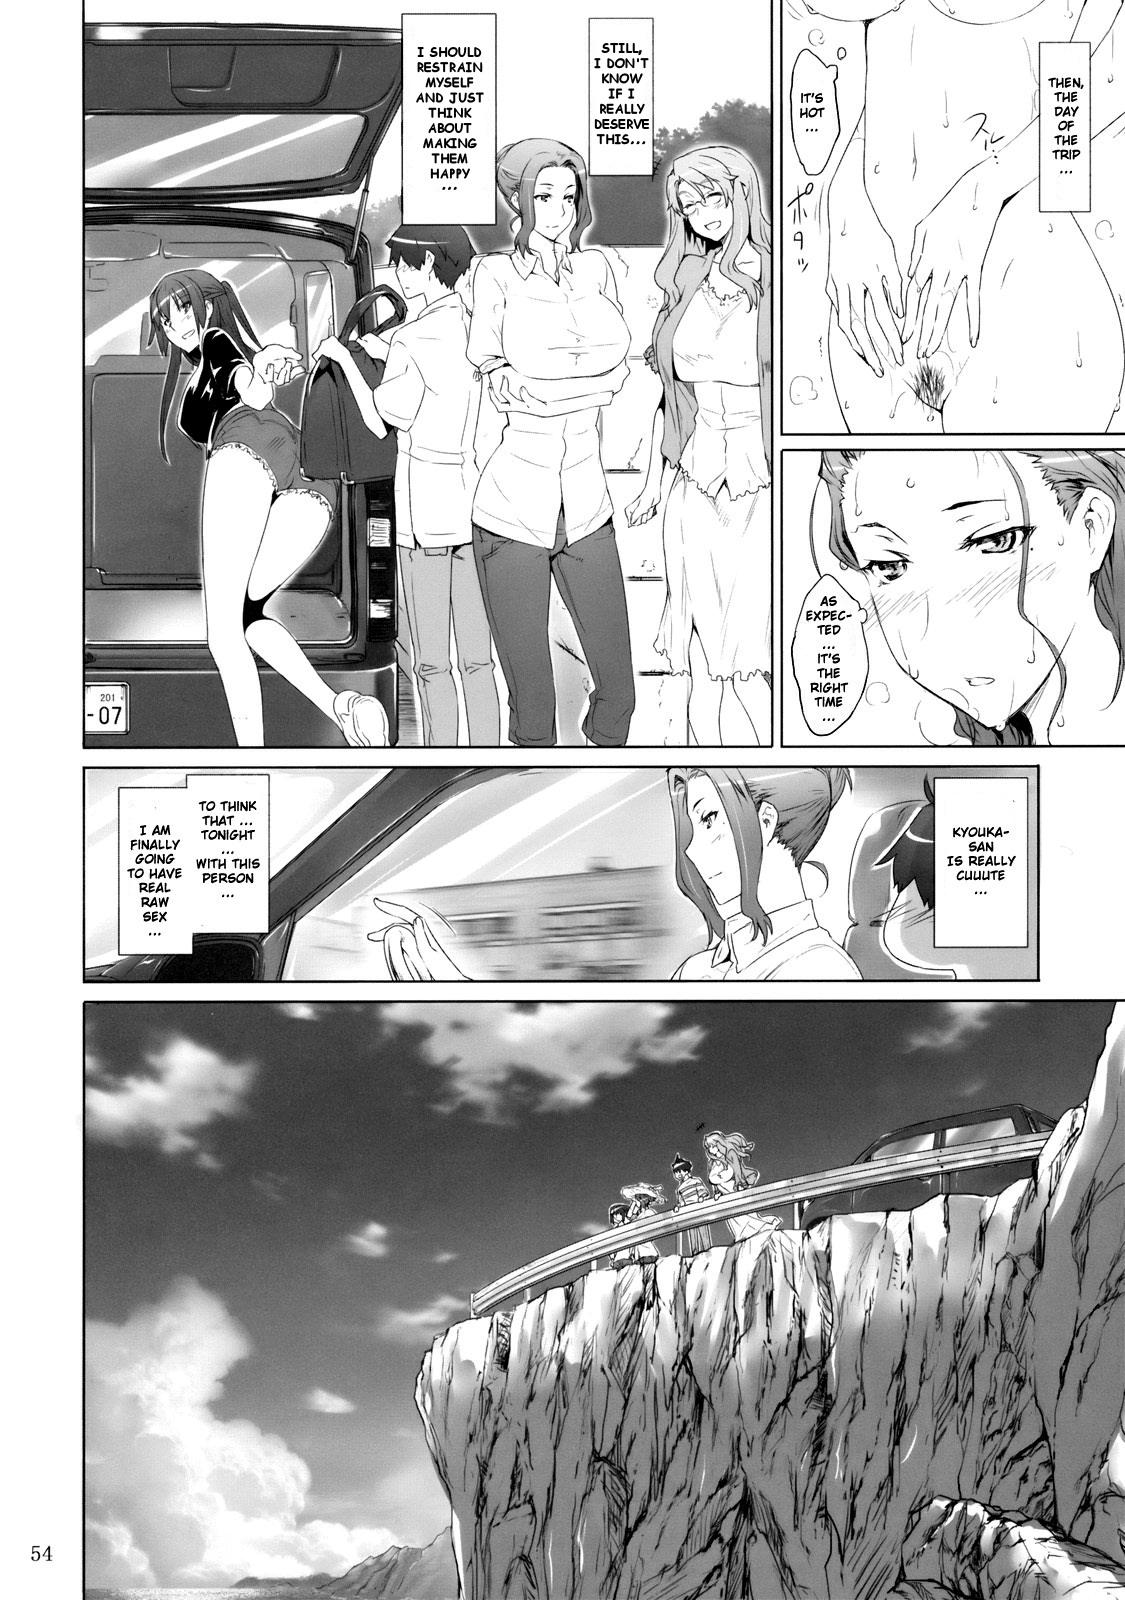 Argenta Mtsp - Tachibana-san's Circumstabces WIth a Man 2 Fucked - Page 3